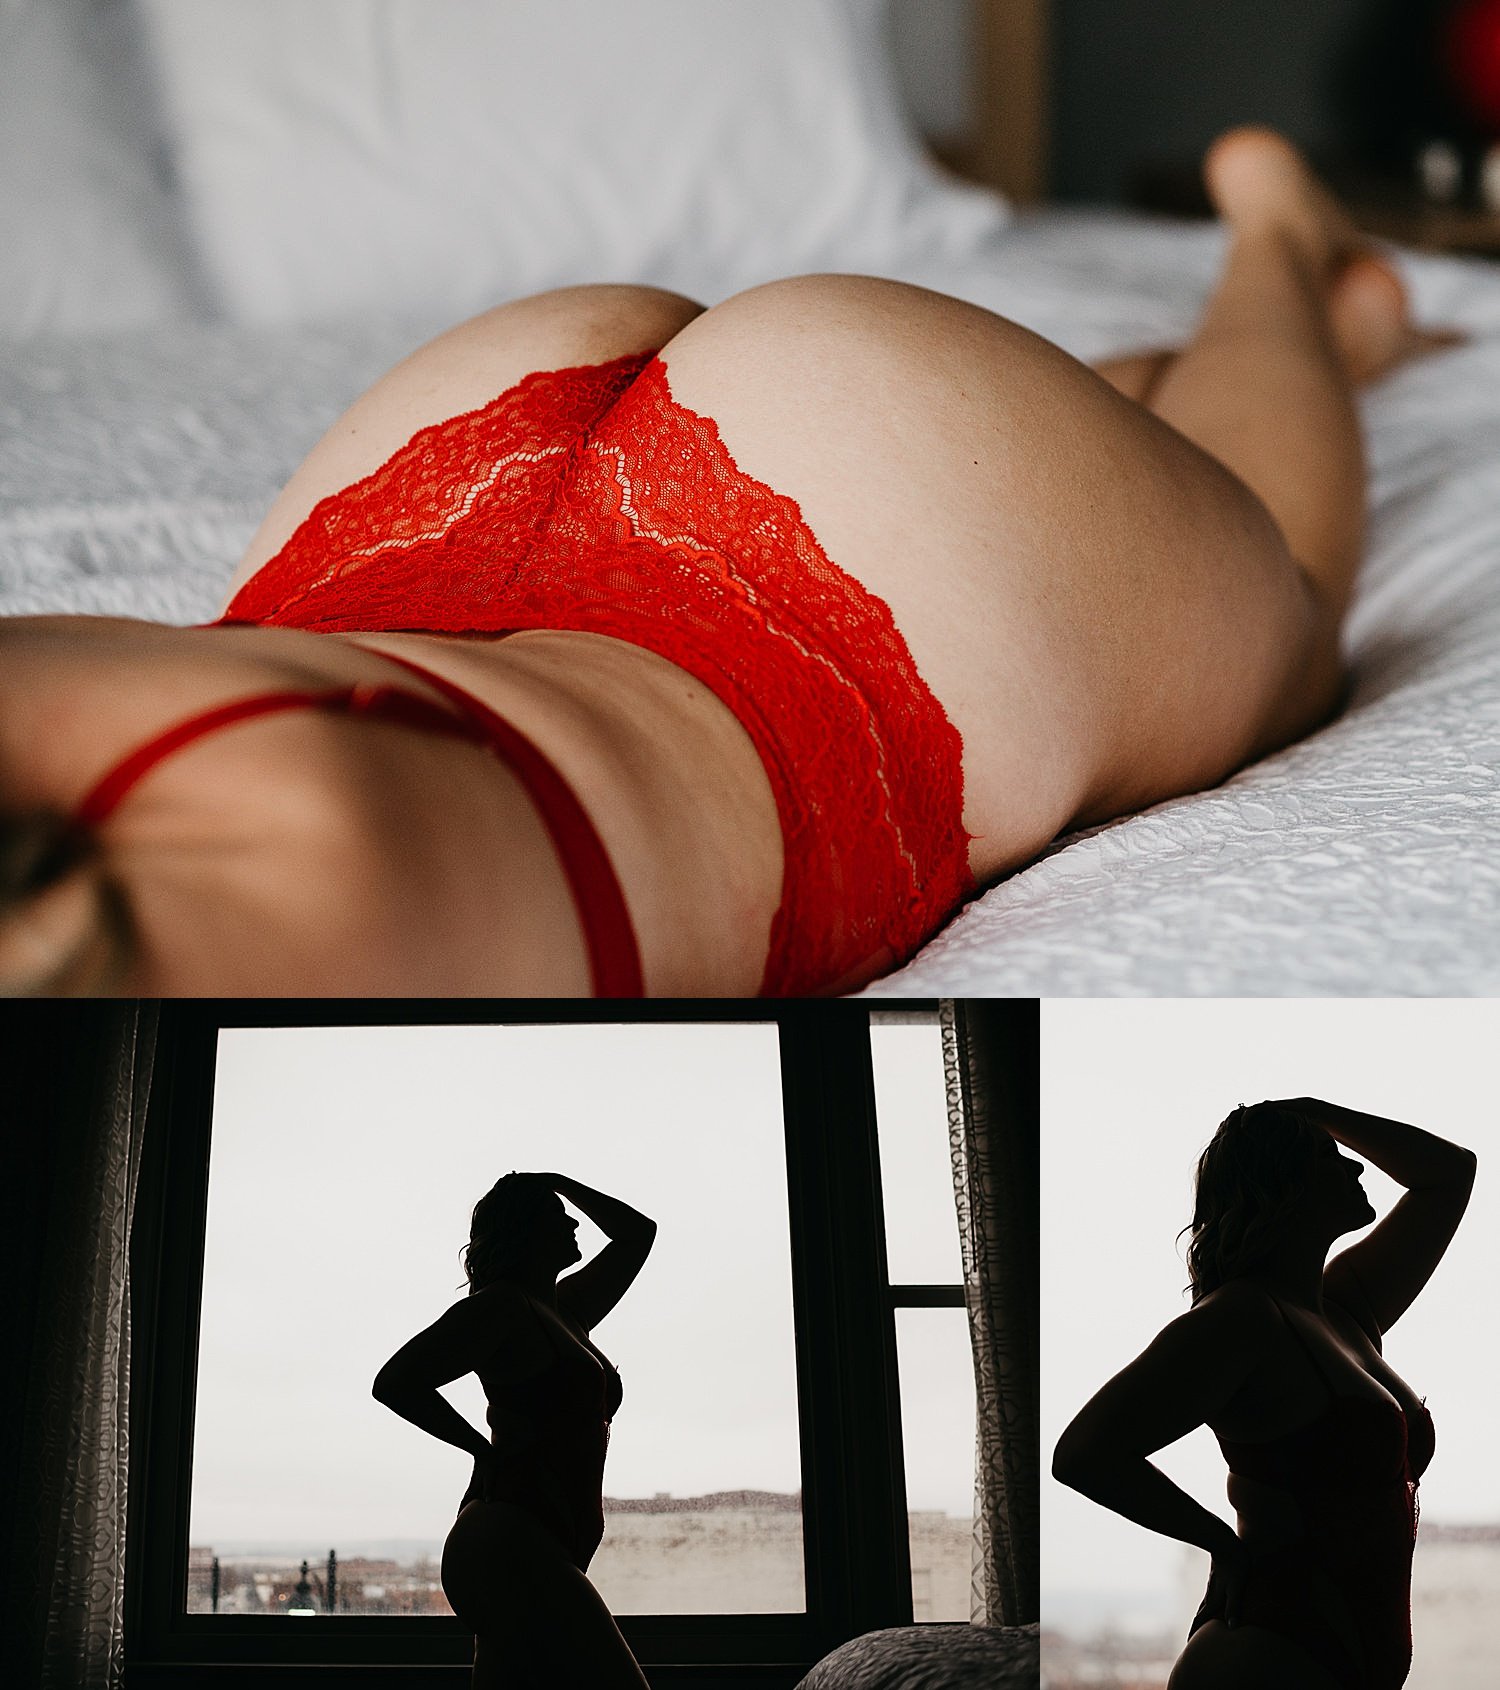  woman in red lingerie learning what not to do during boudoir experience  